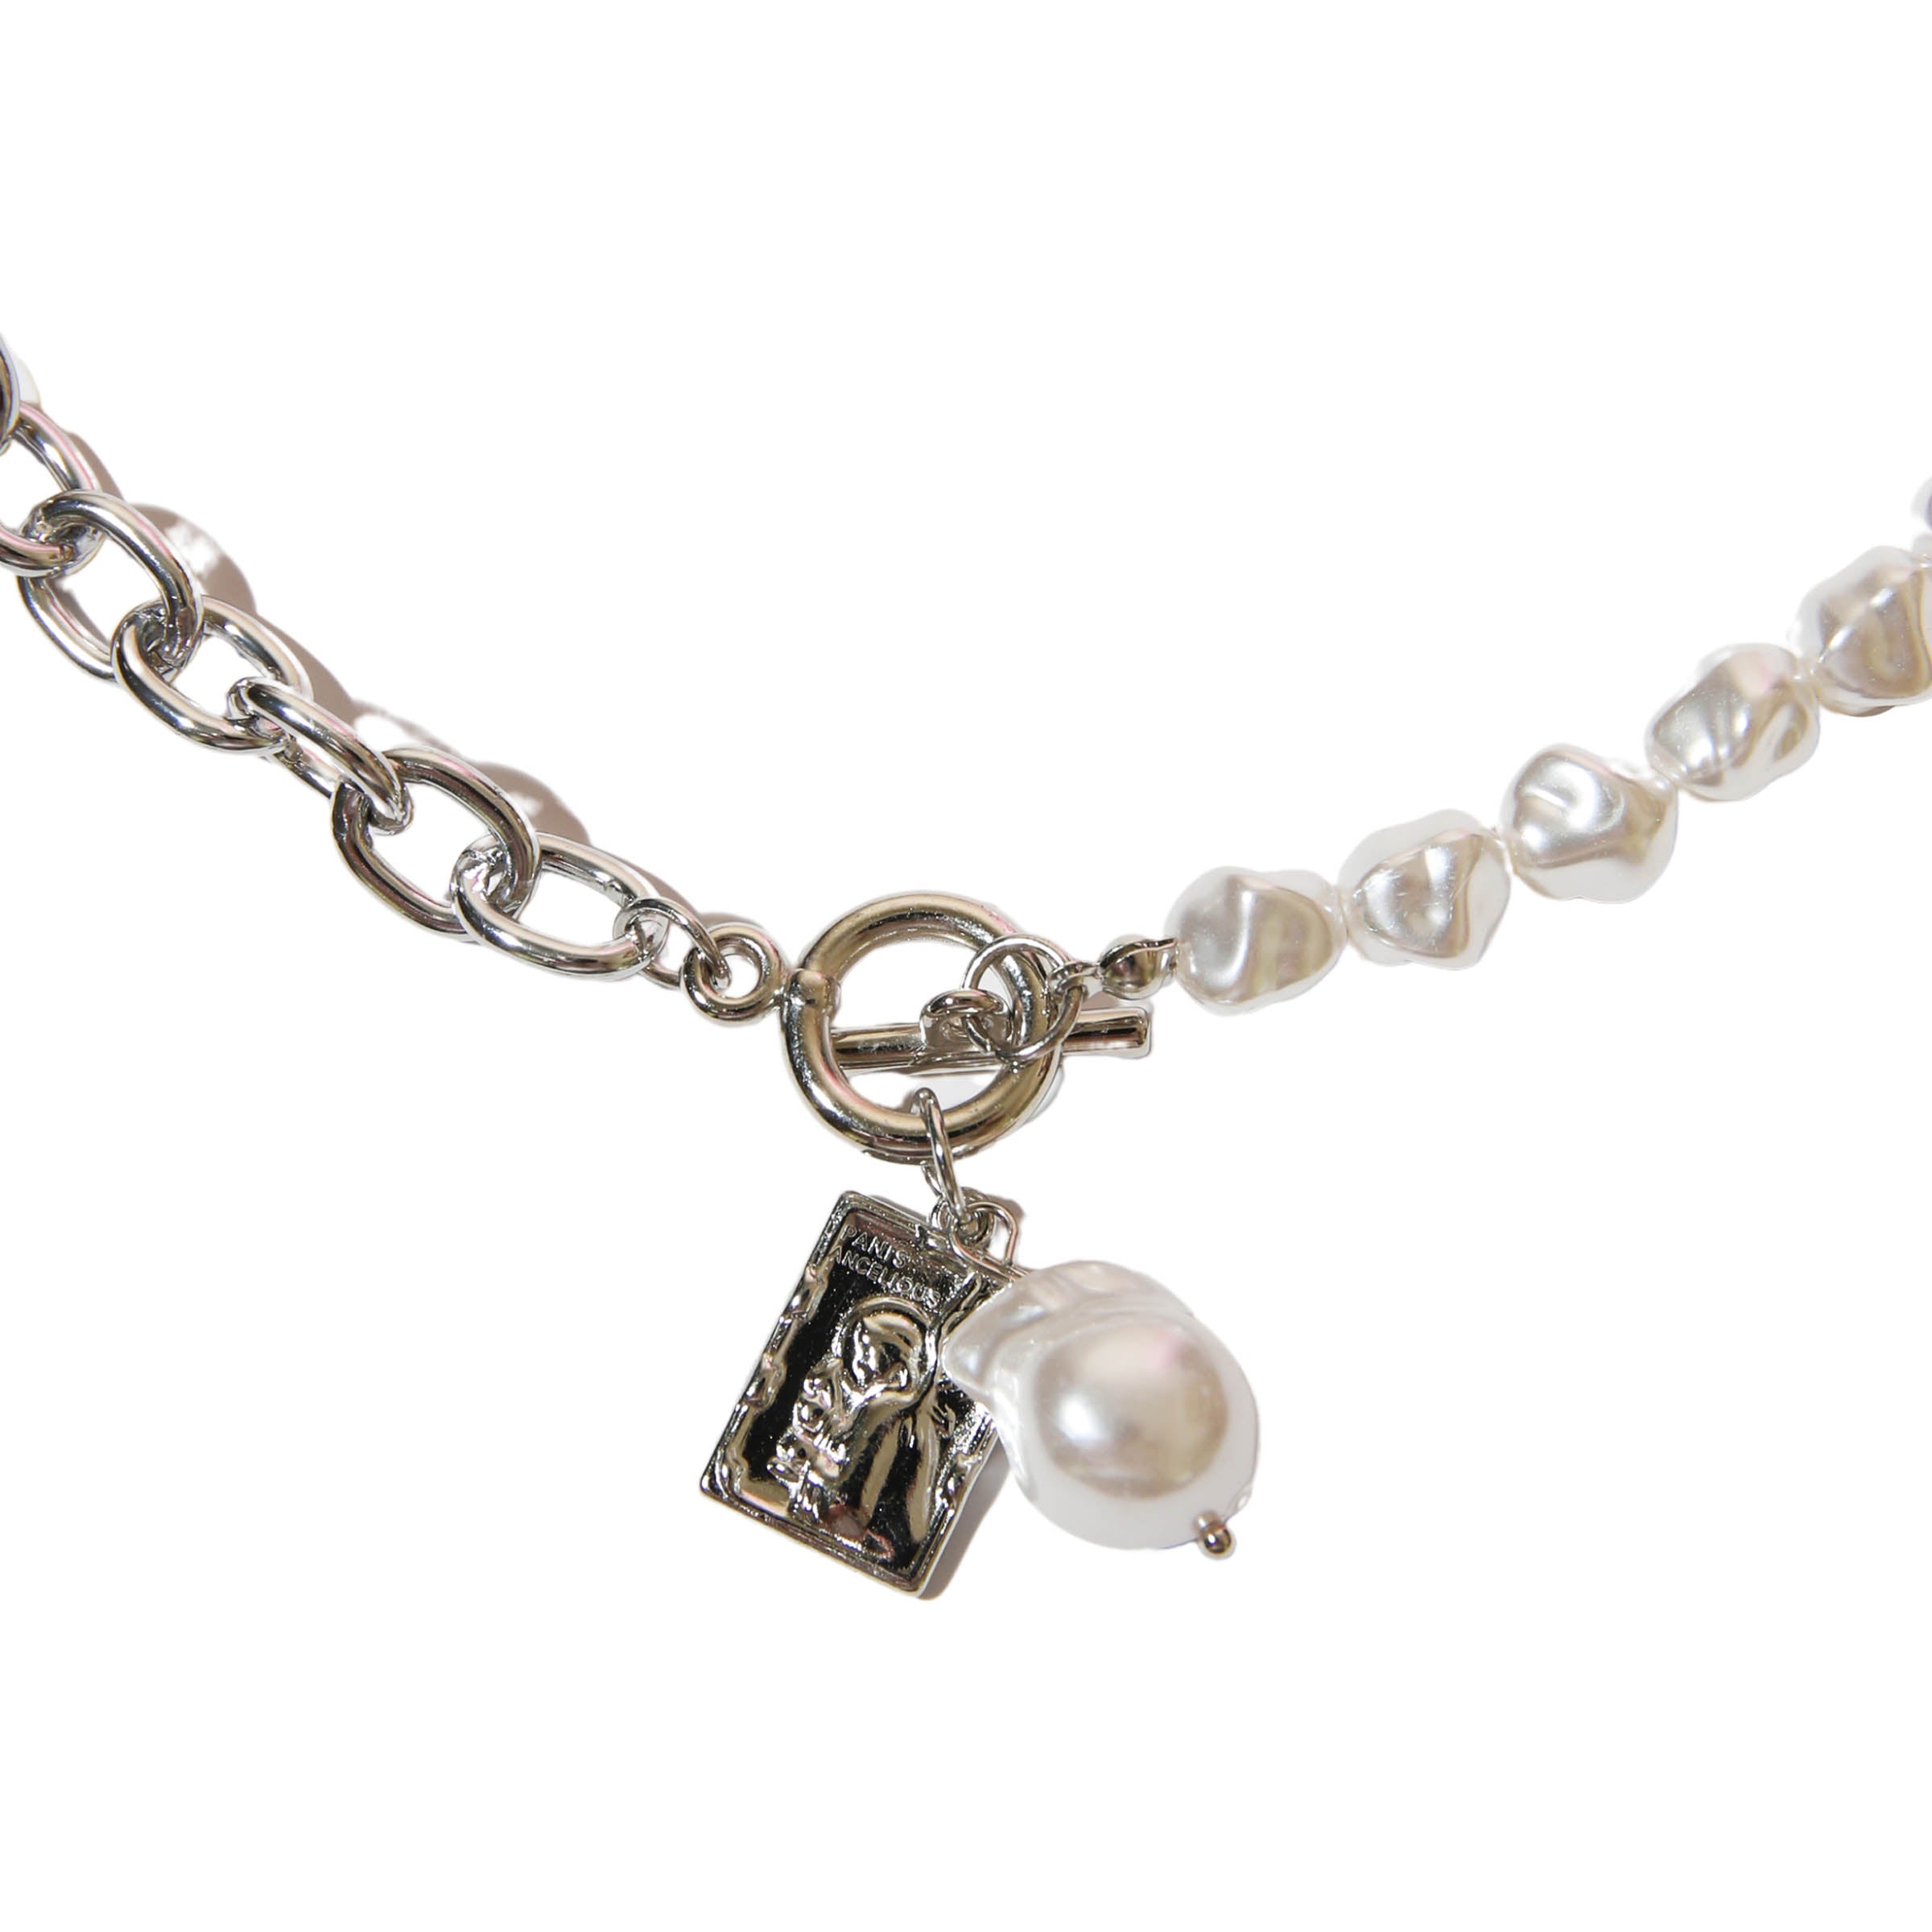 Pearly Angels Panis Angelicus Necklace